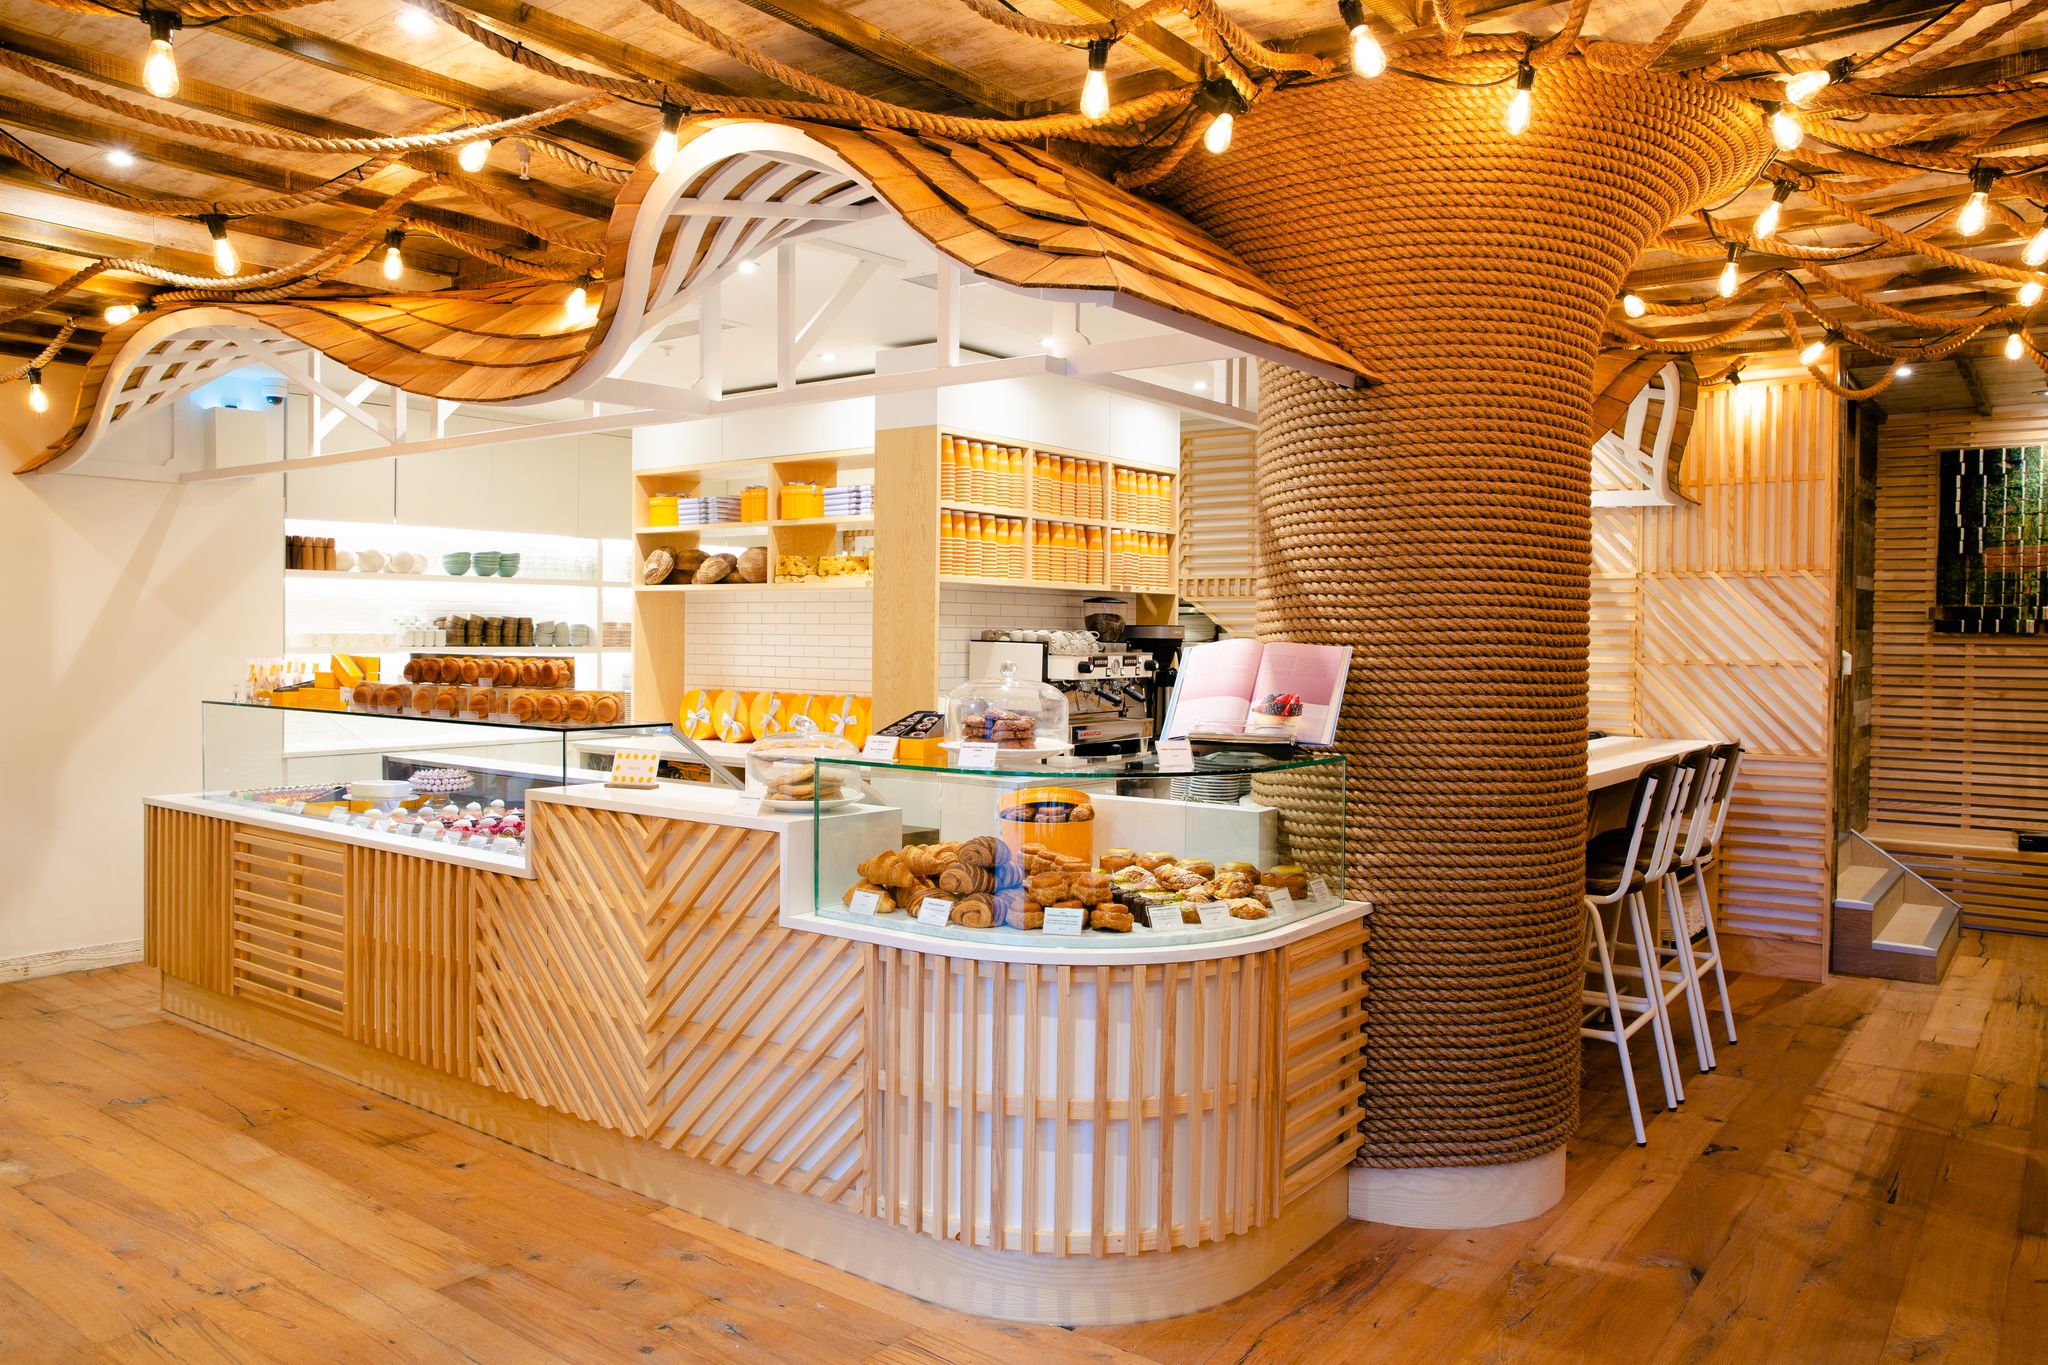 Dominque Ansel Bakery - Treehouse